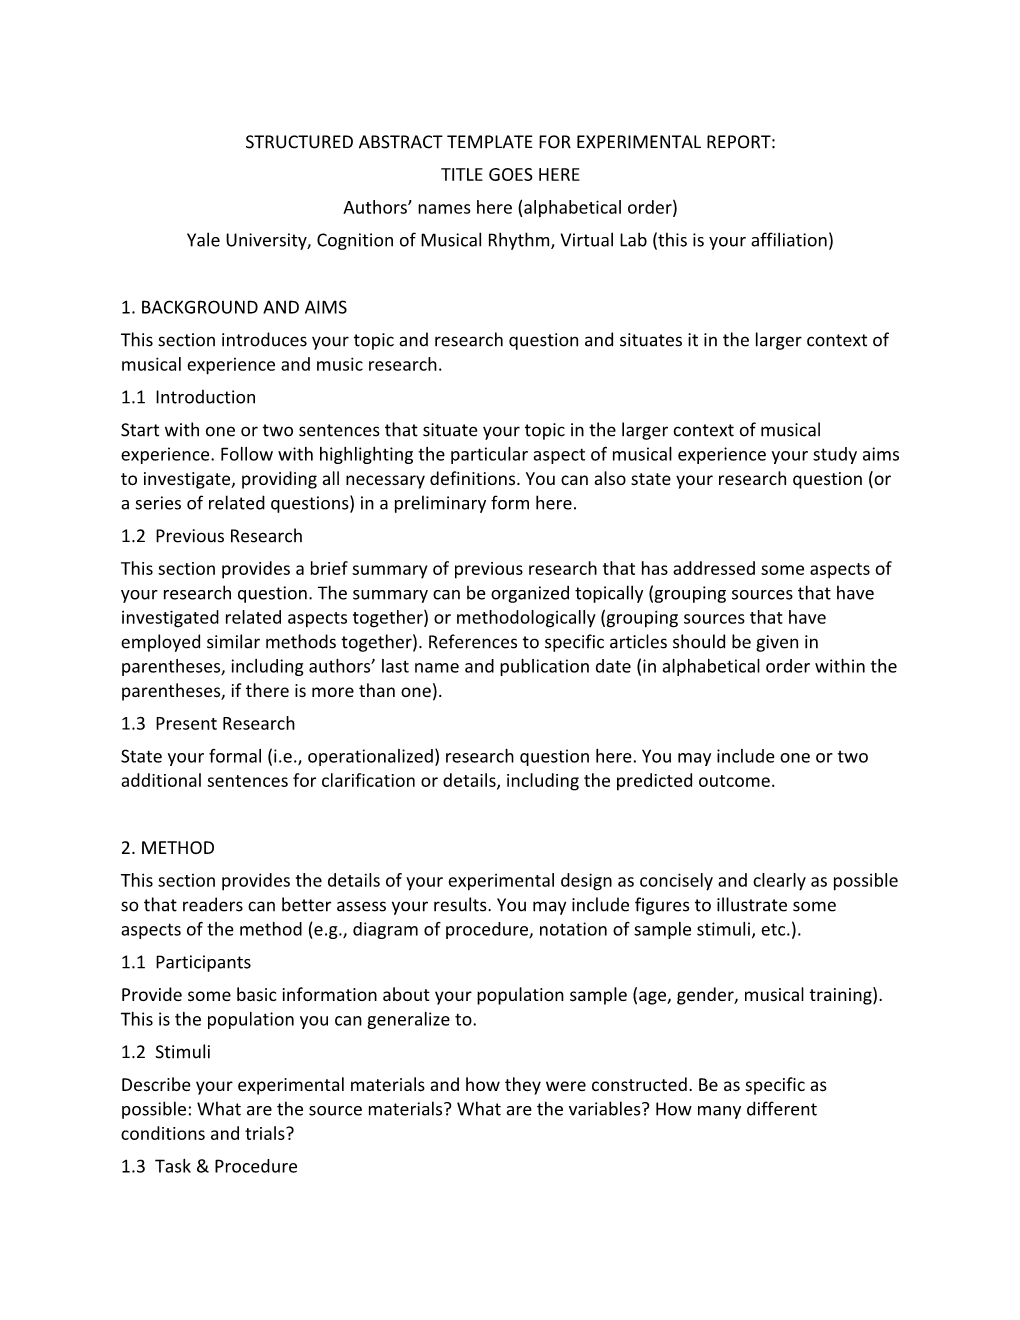 Structured Abstract Template for Experimental Report